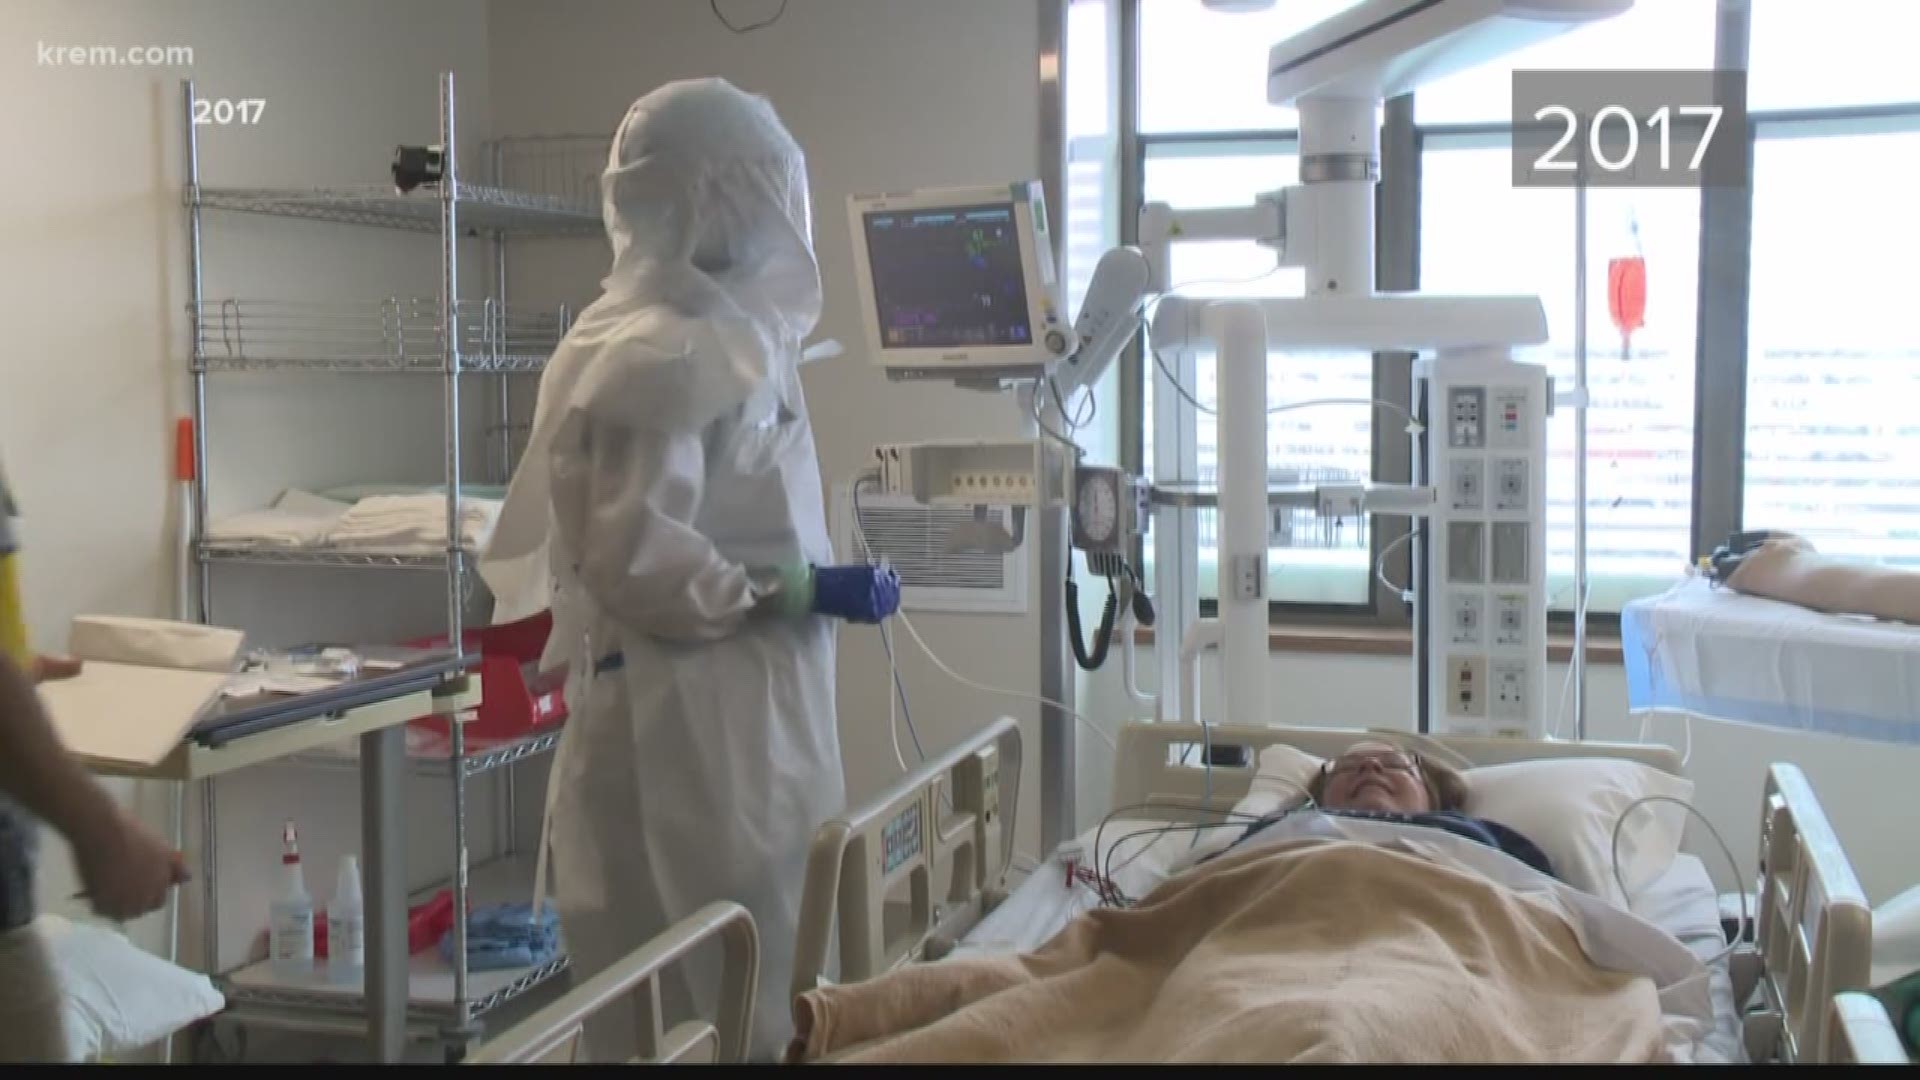 This is video from 2017 showing a training exercise inside Sacred Heart's isolation unit. At that time, hospital staff were simulating how to treat an Ebola patient